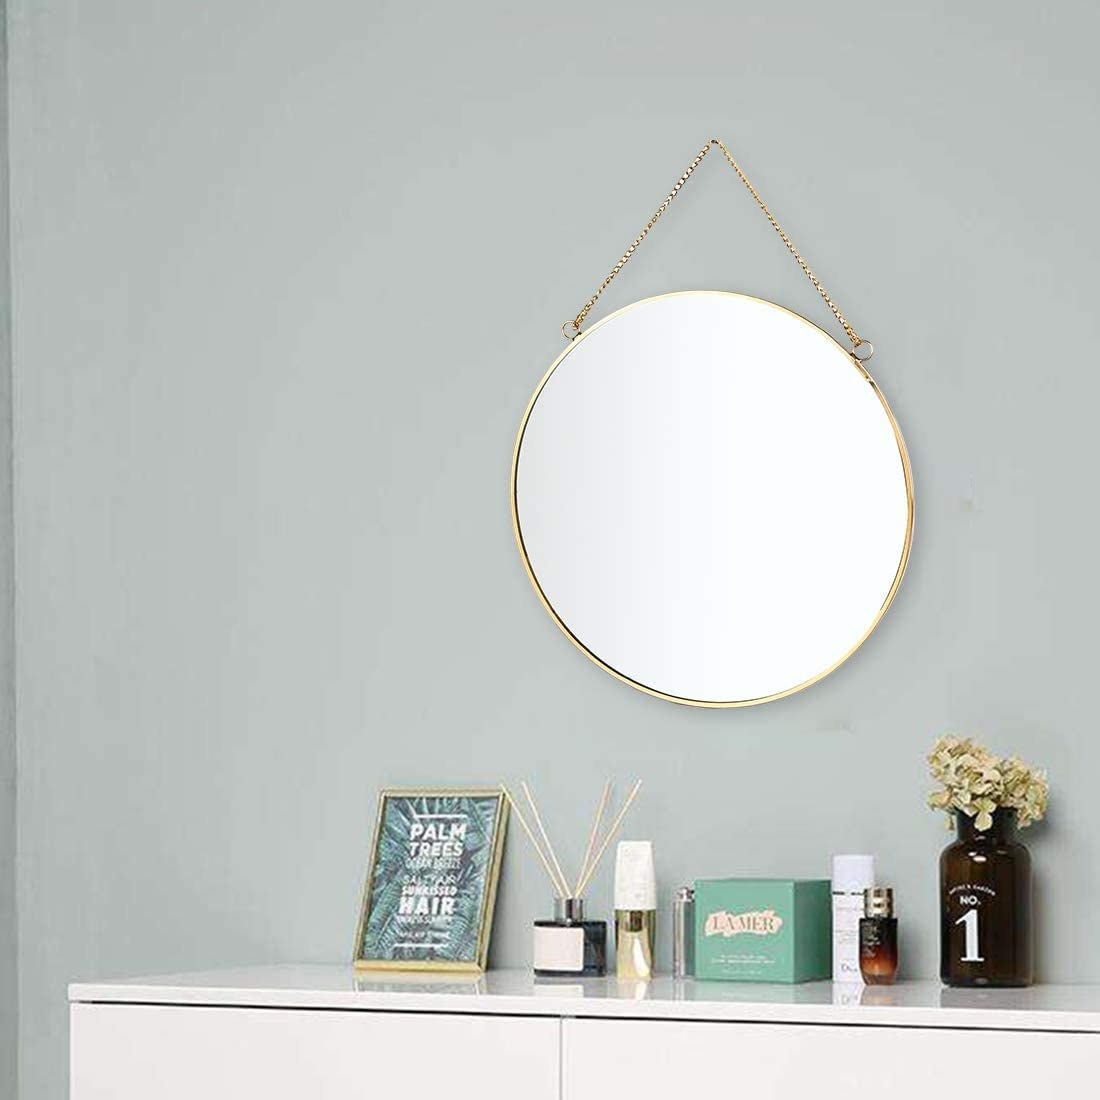 The mirror is hung above a dresser in a bedroom